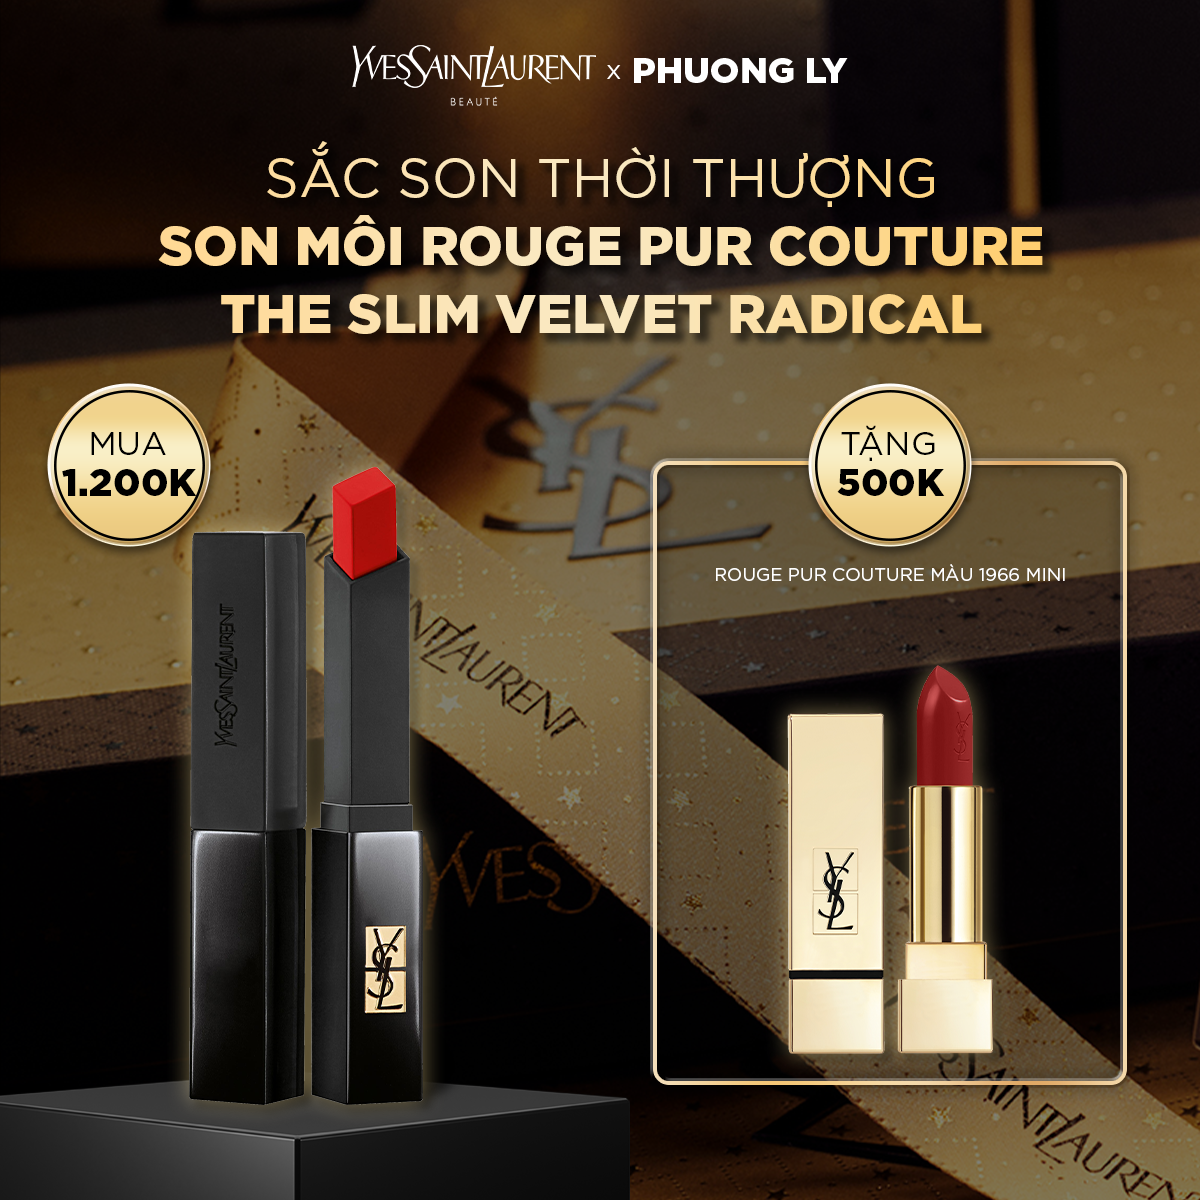 [PLY] Son môi Rouge Pur Couture The Slim Velvet Radical